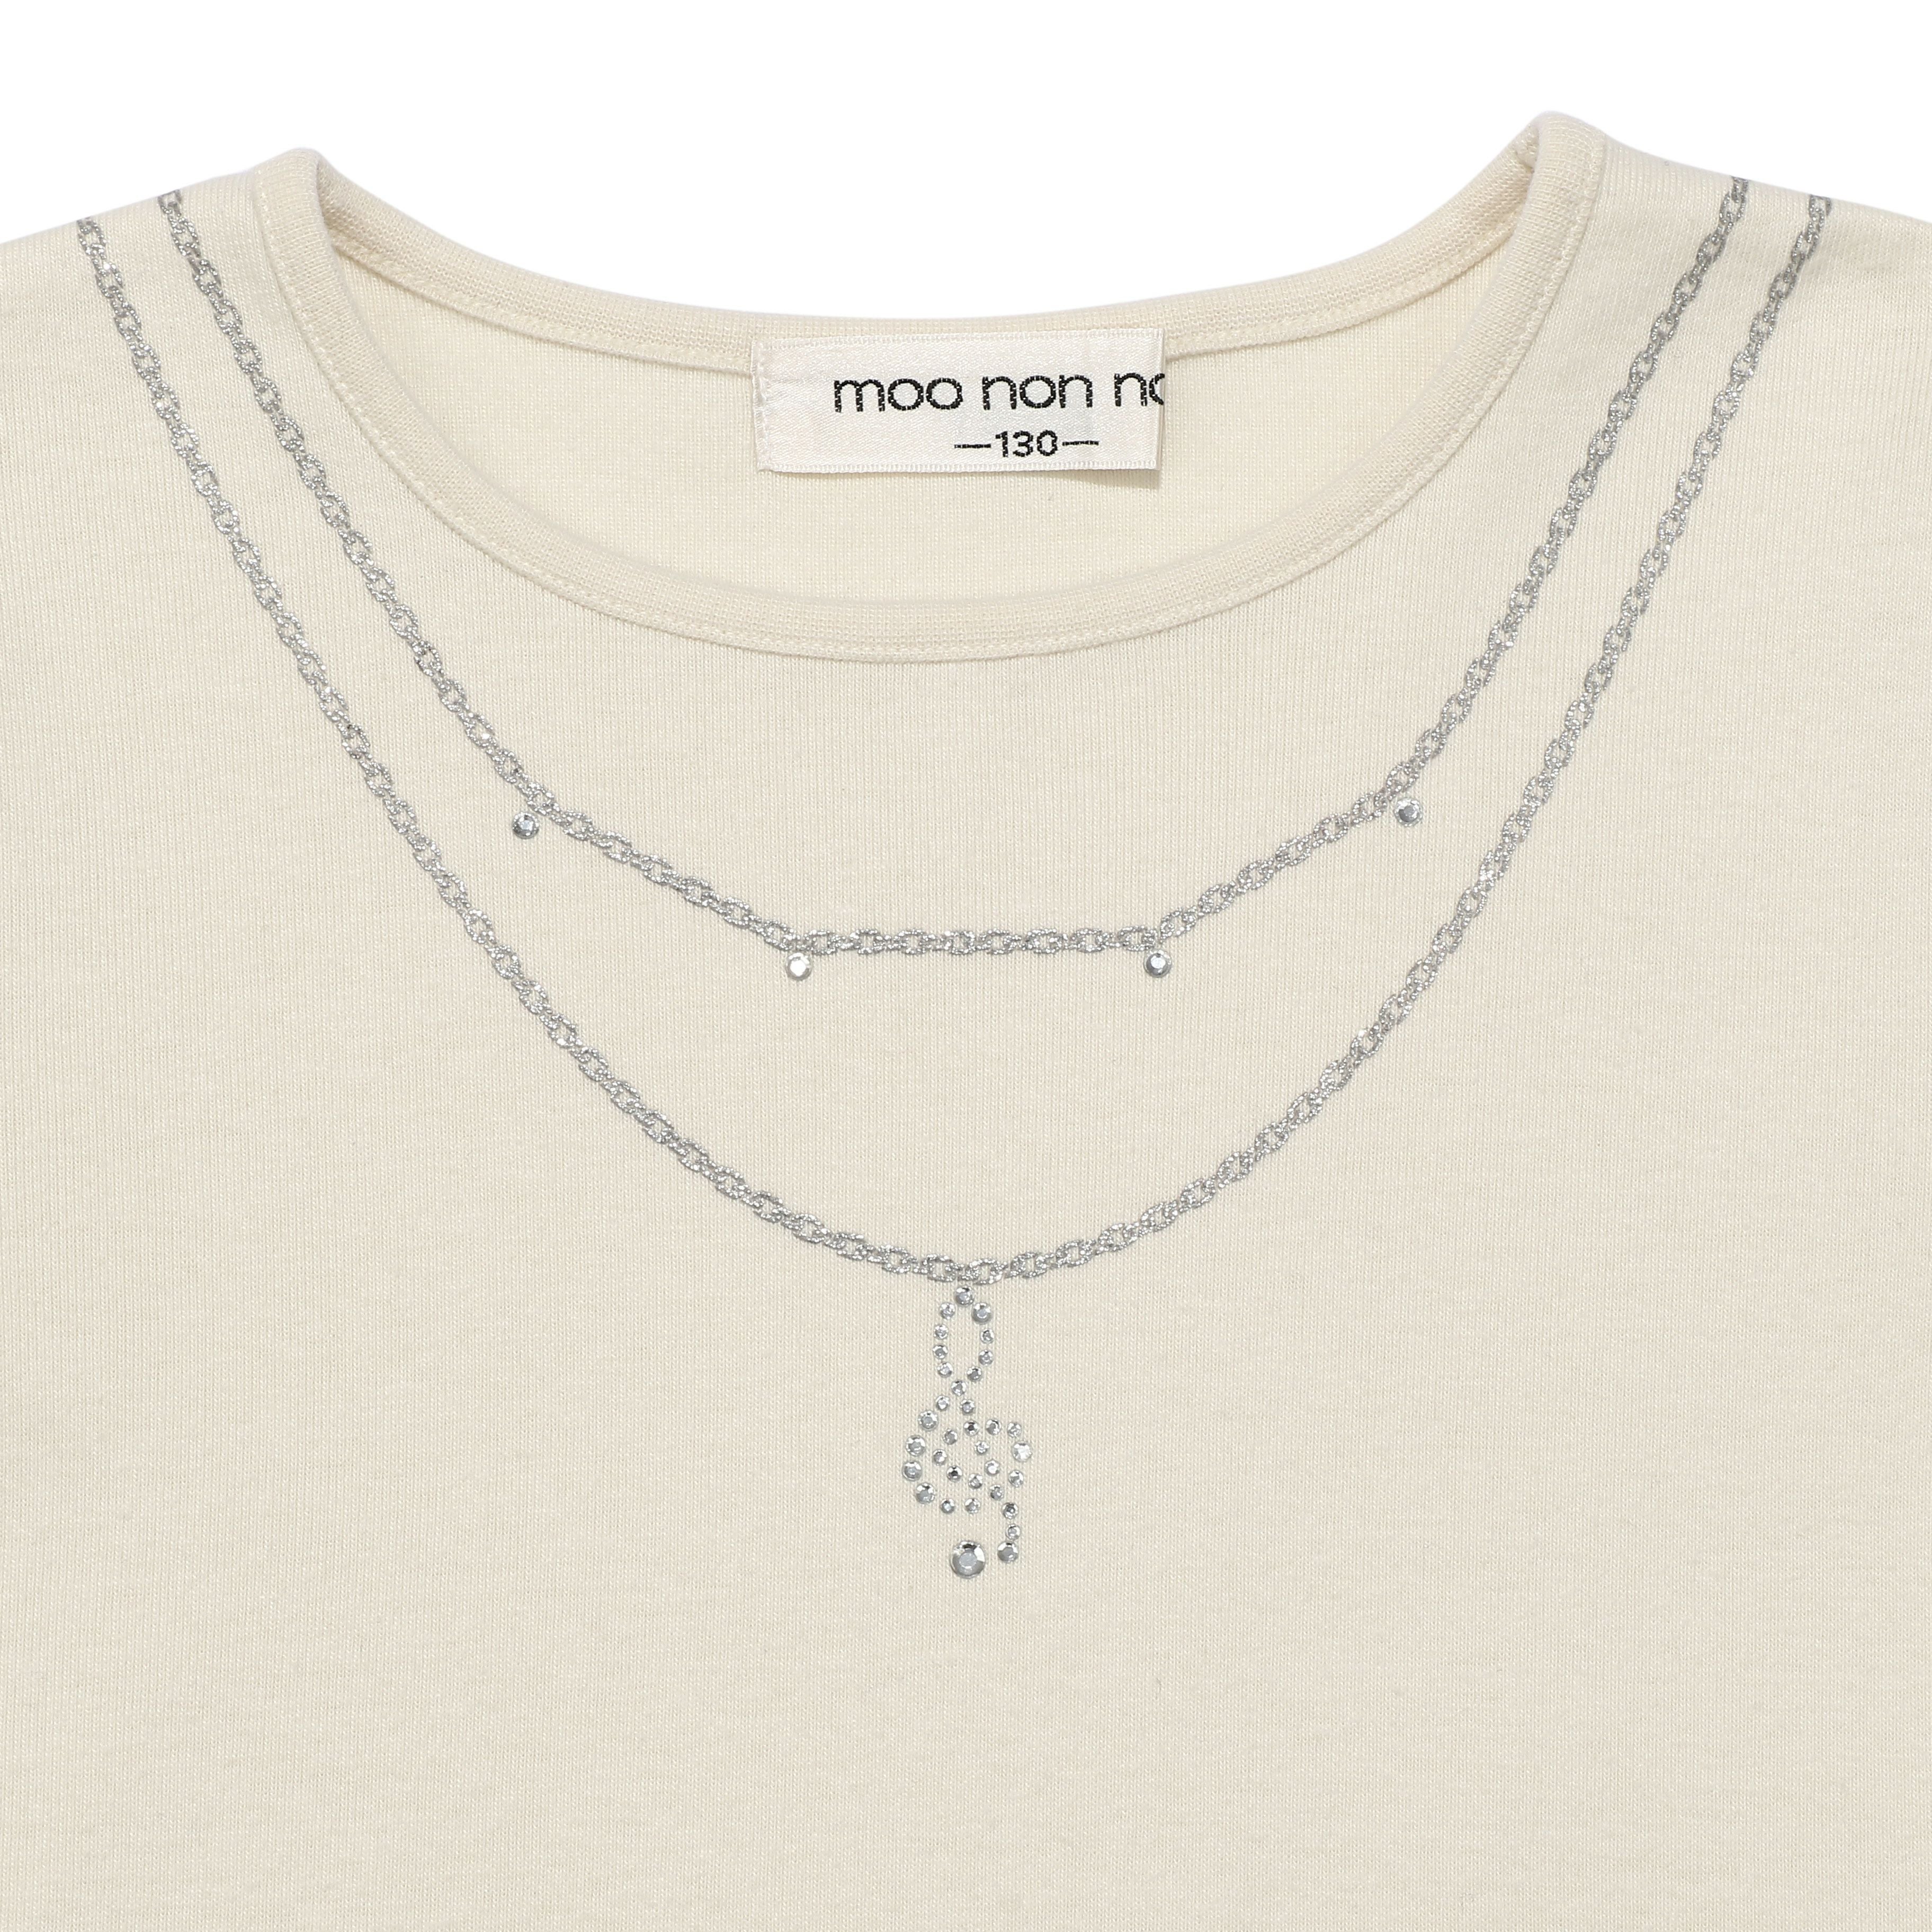 Necklace style glitter print notes Rhinestone T -shirt Off White Design point 1